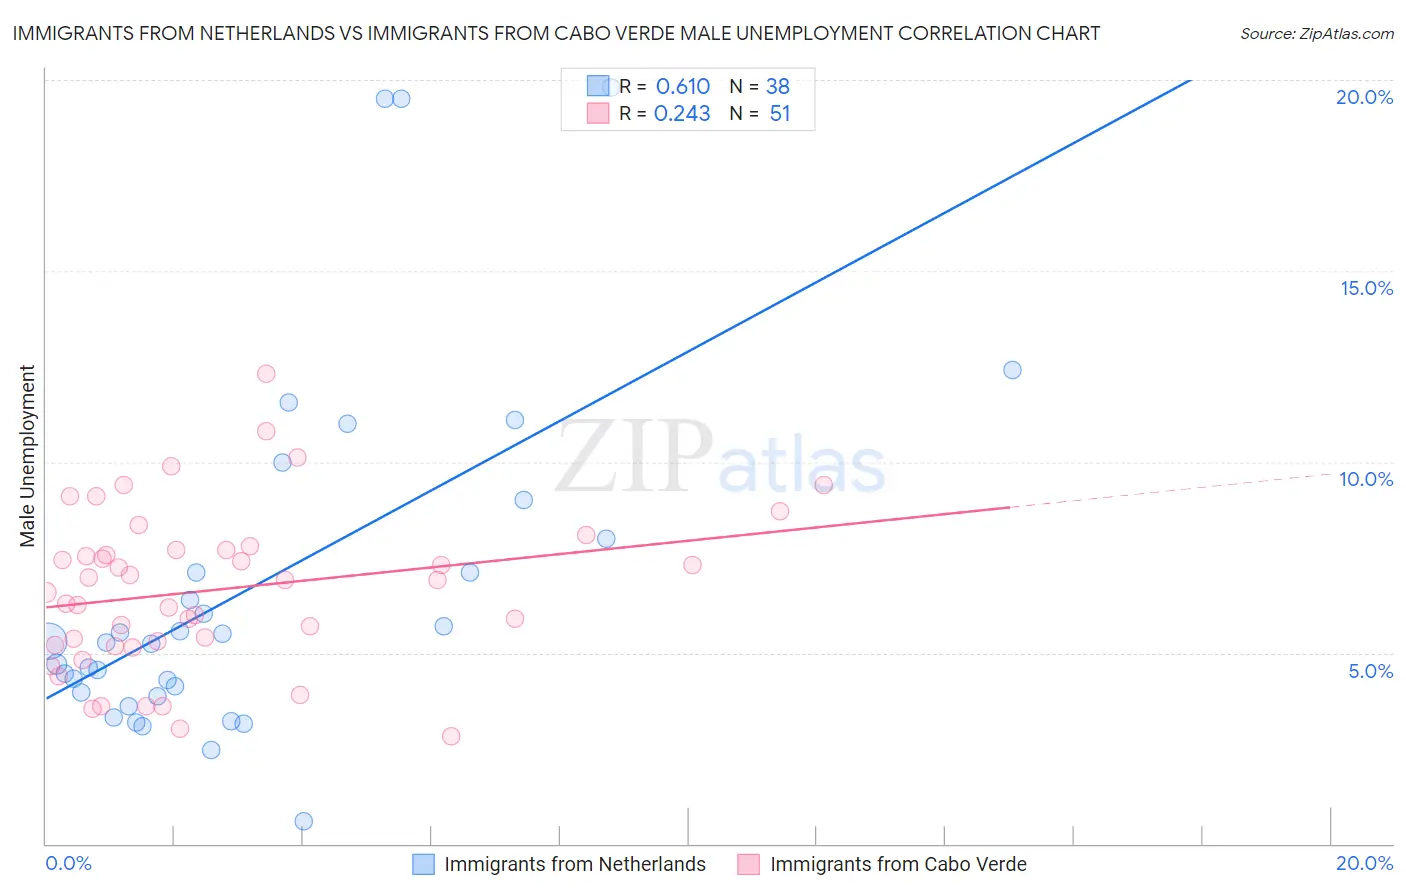 Immigrants from Netherlands vs Immigrants from Cabo Verde Male Unemployment